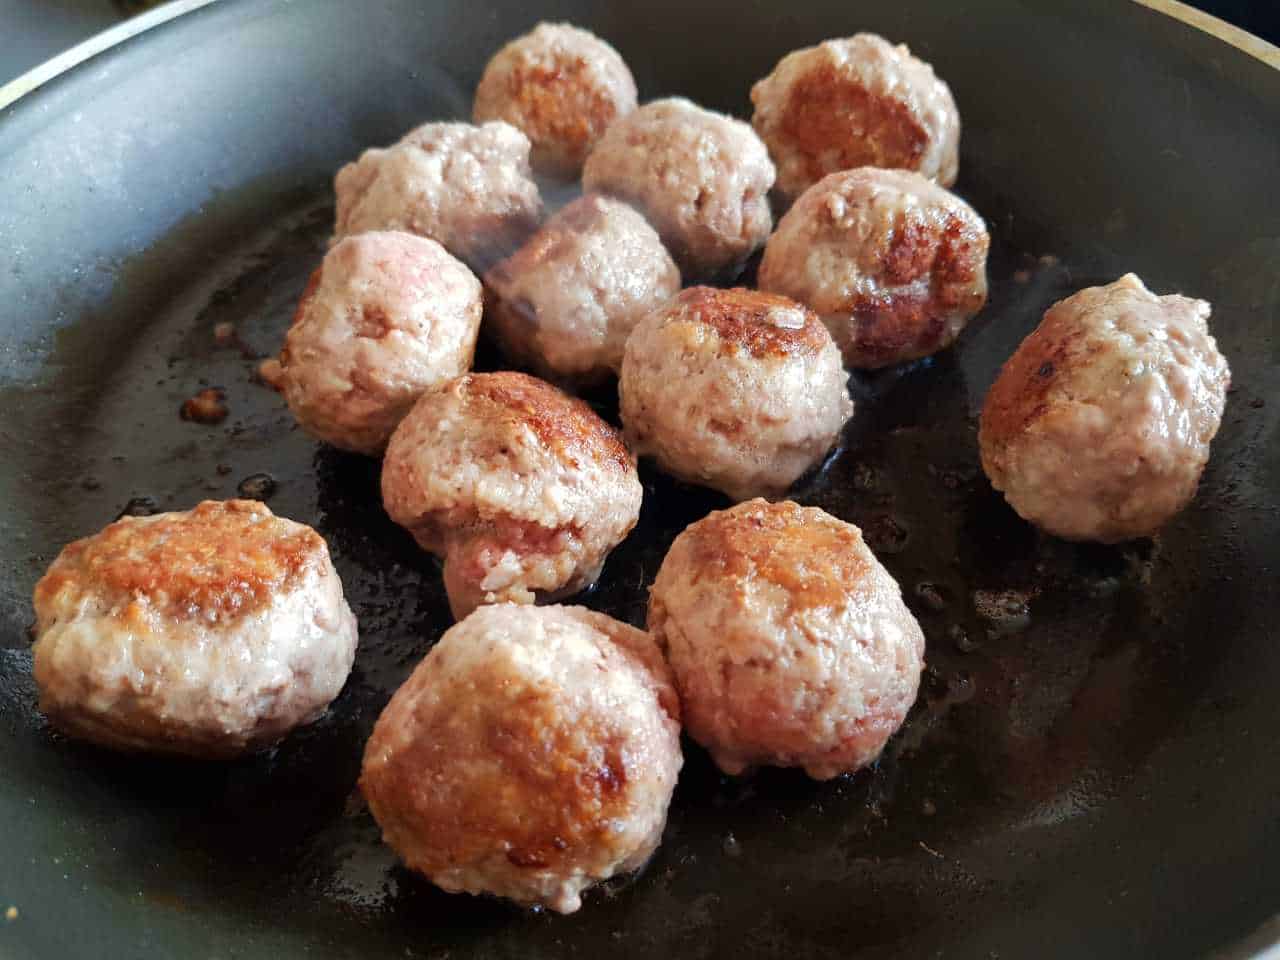 Meatballs cooking in a pan.